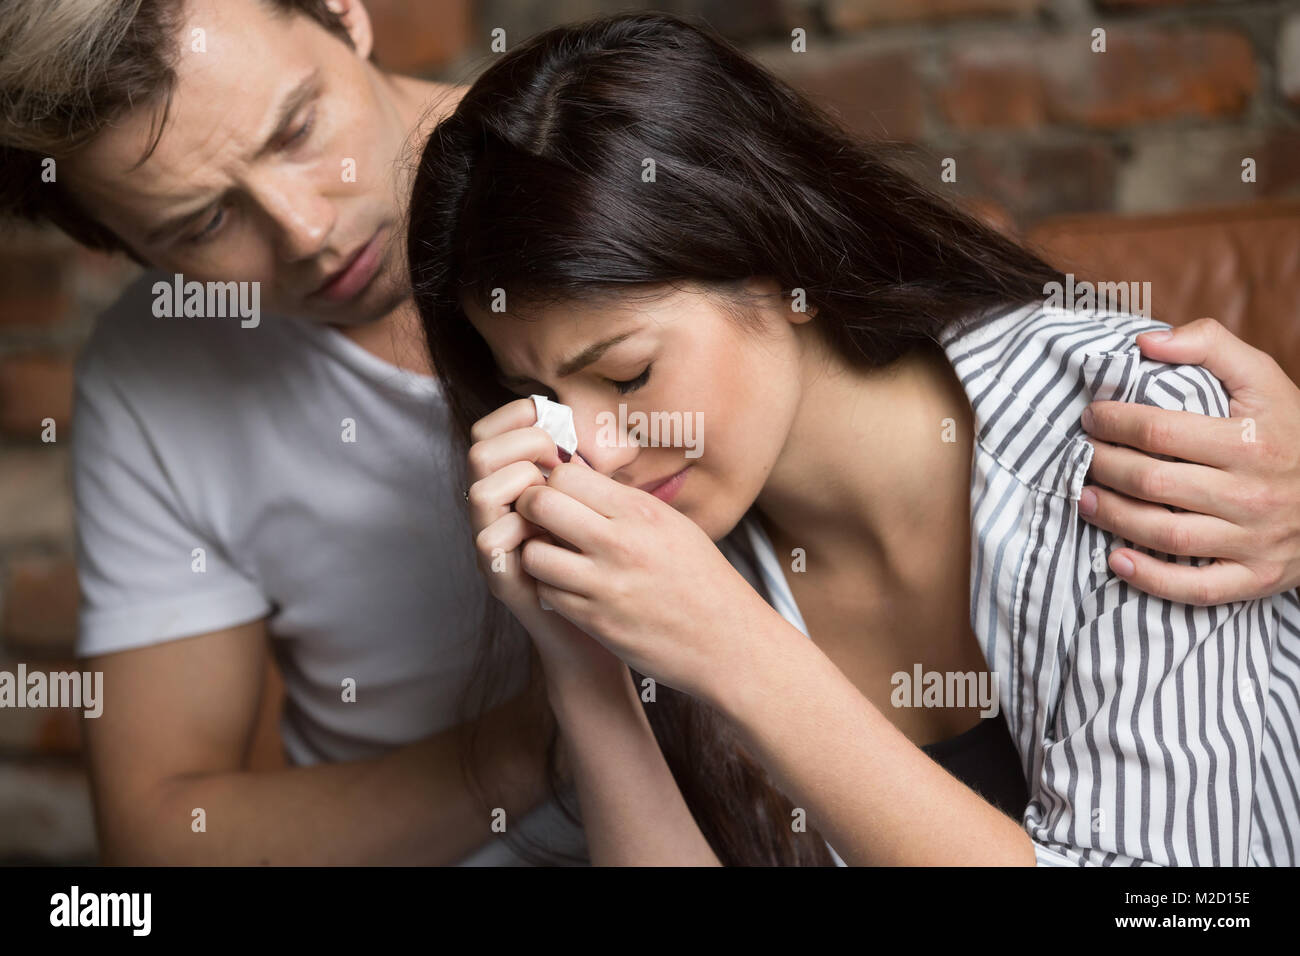 Man comforting crying sad woman, friend consoling girl in tears Stock Photo